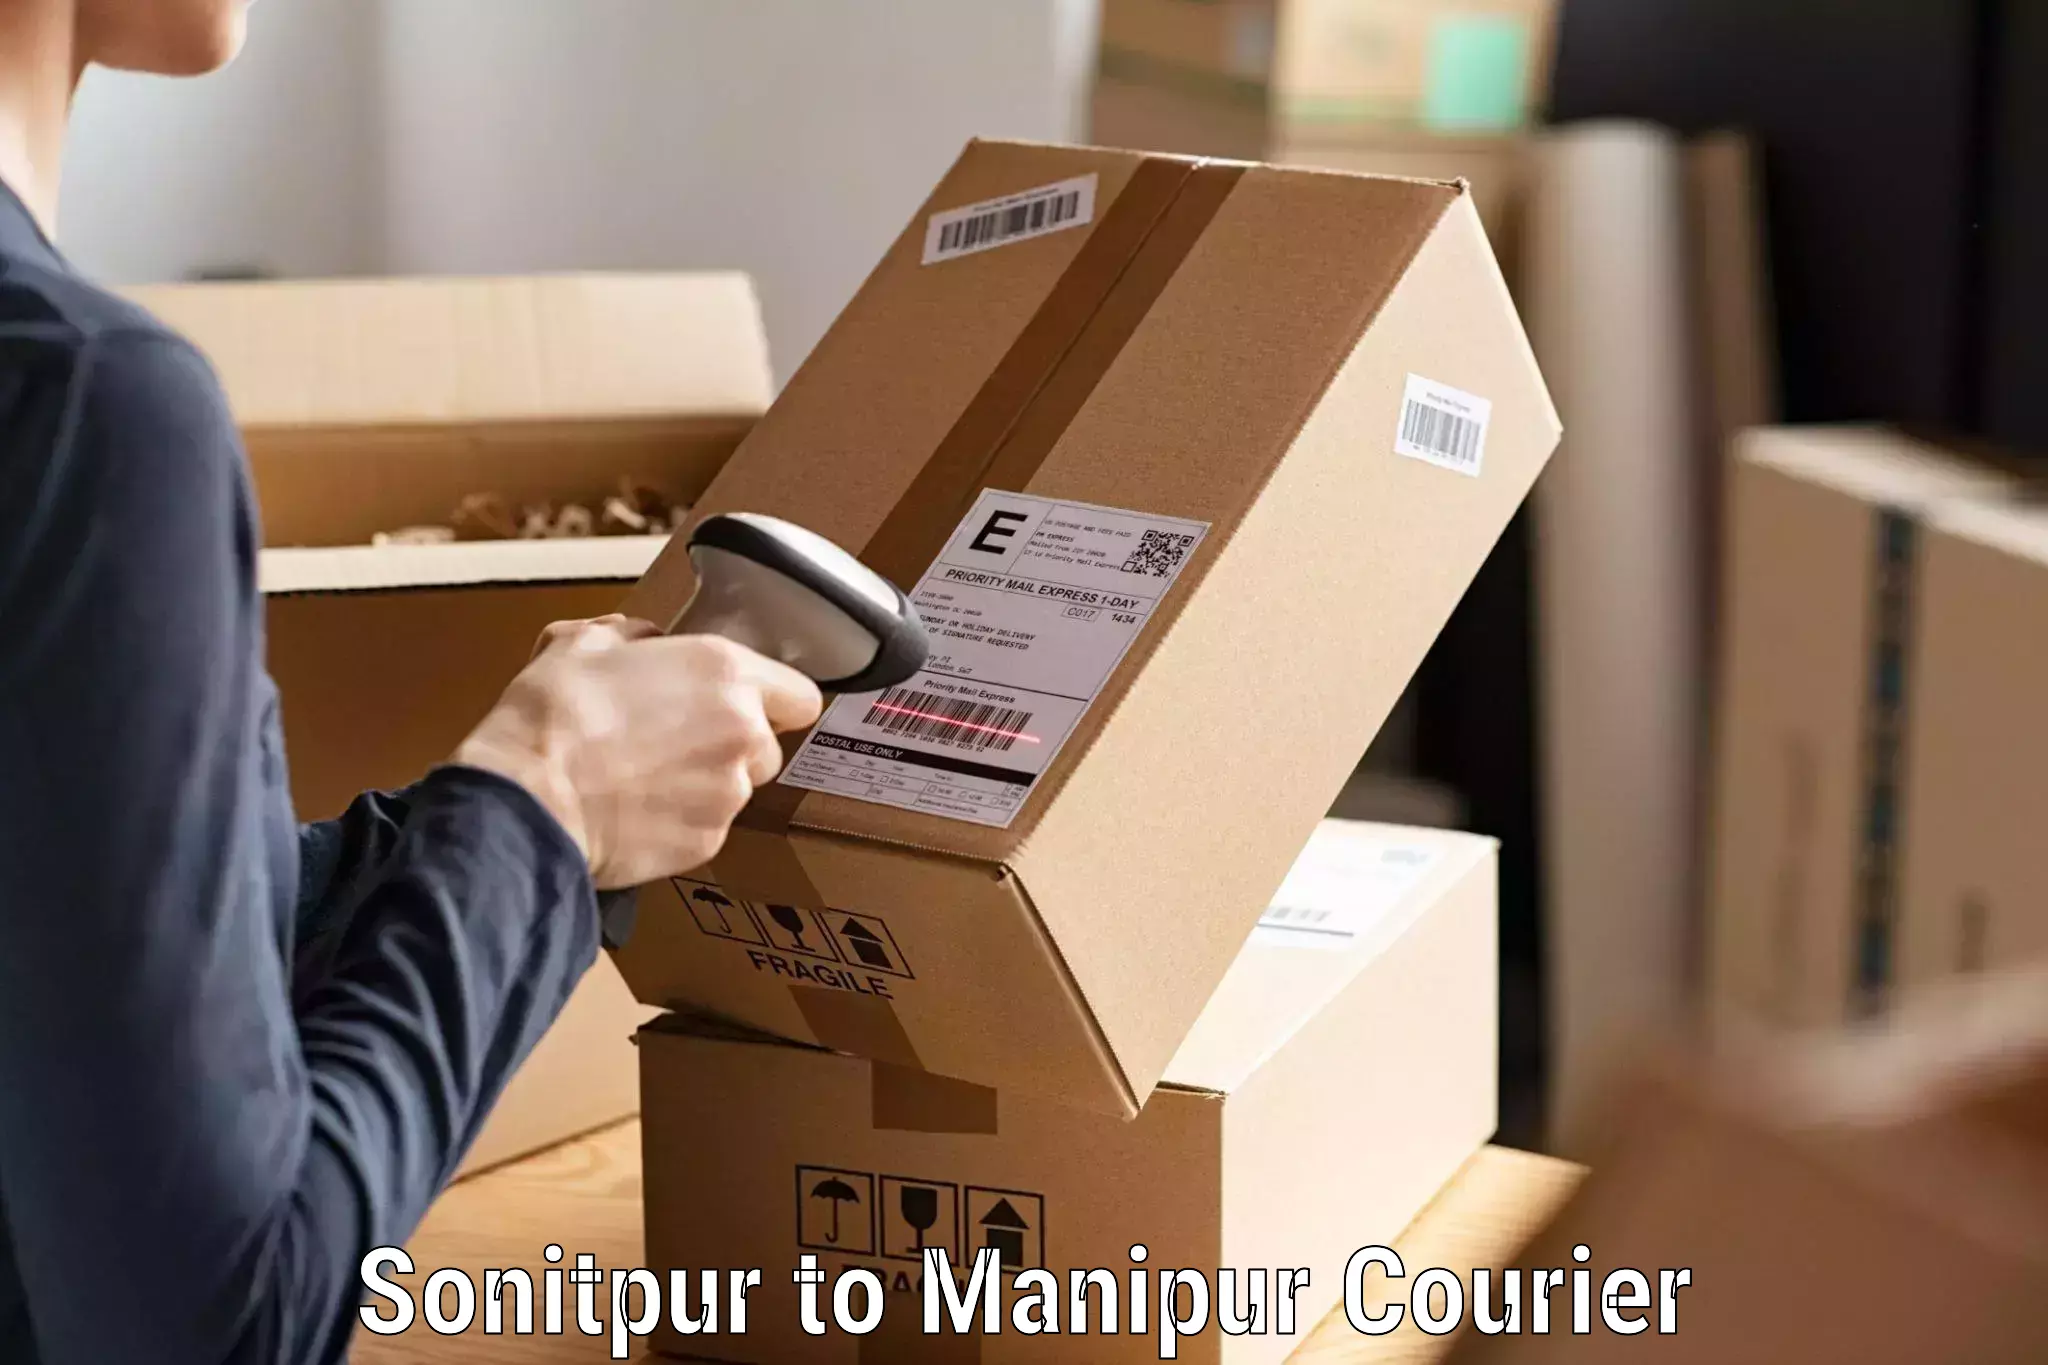 24-hour courier service Sonitpur to Manipur